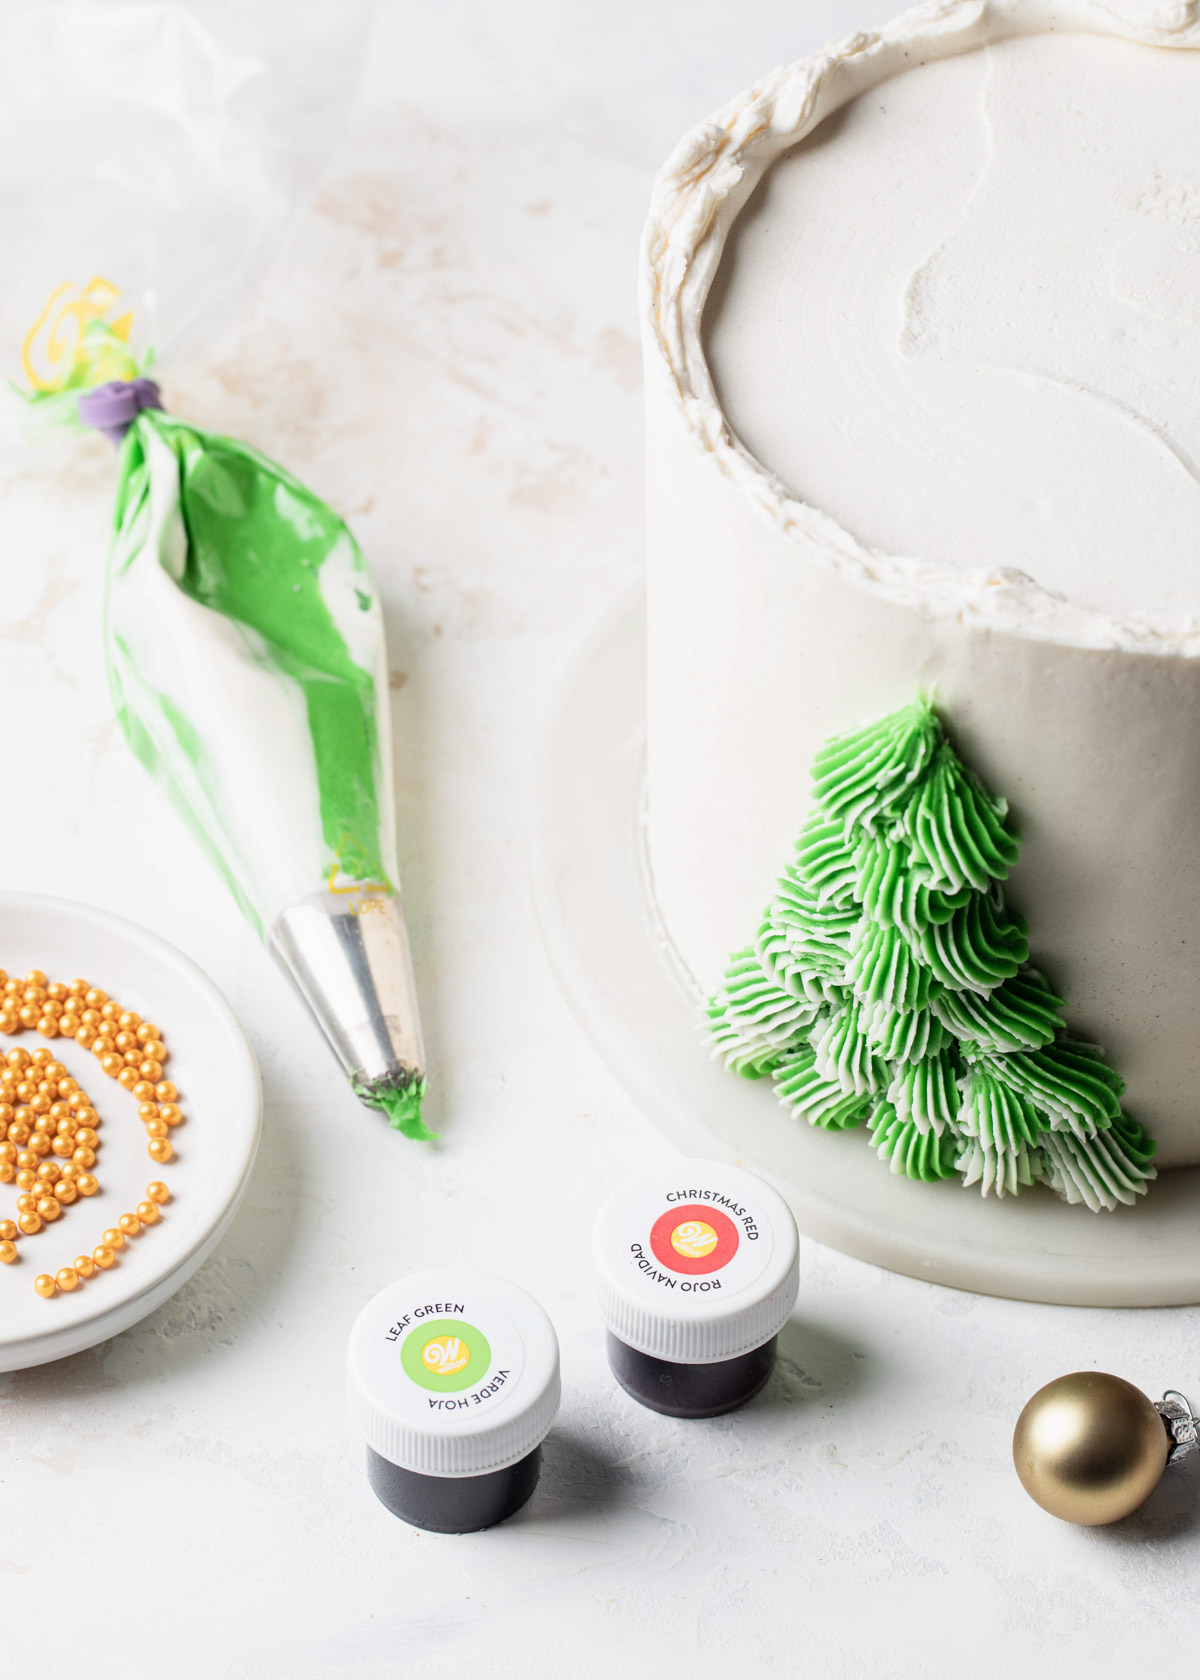 Making a Christmas tree cake with green piped buttercream